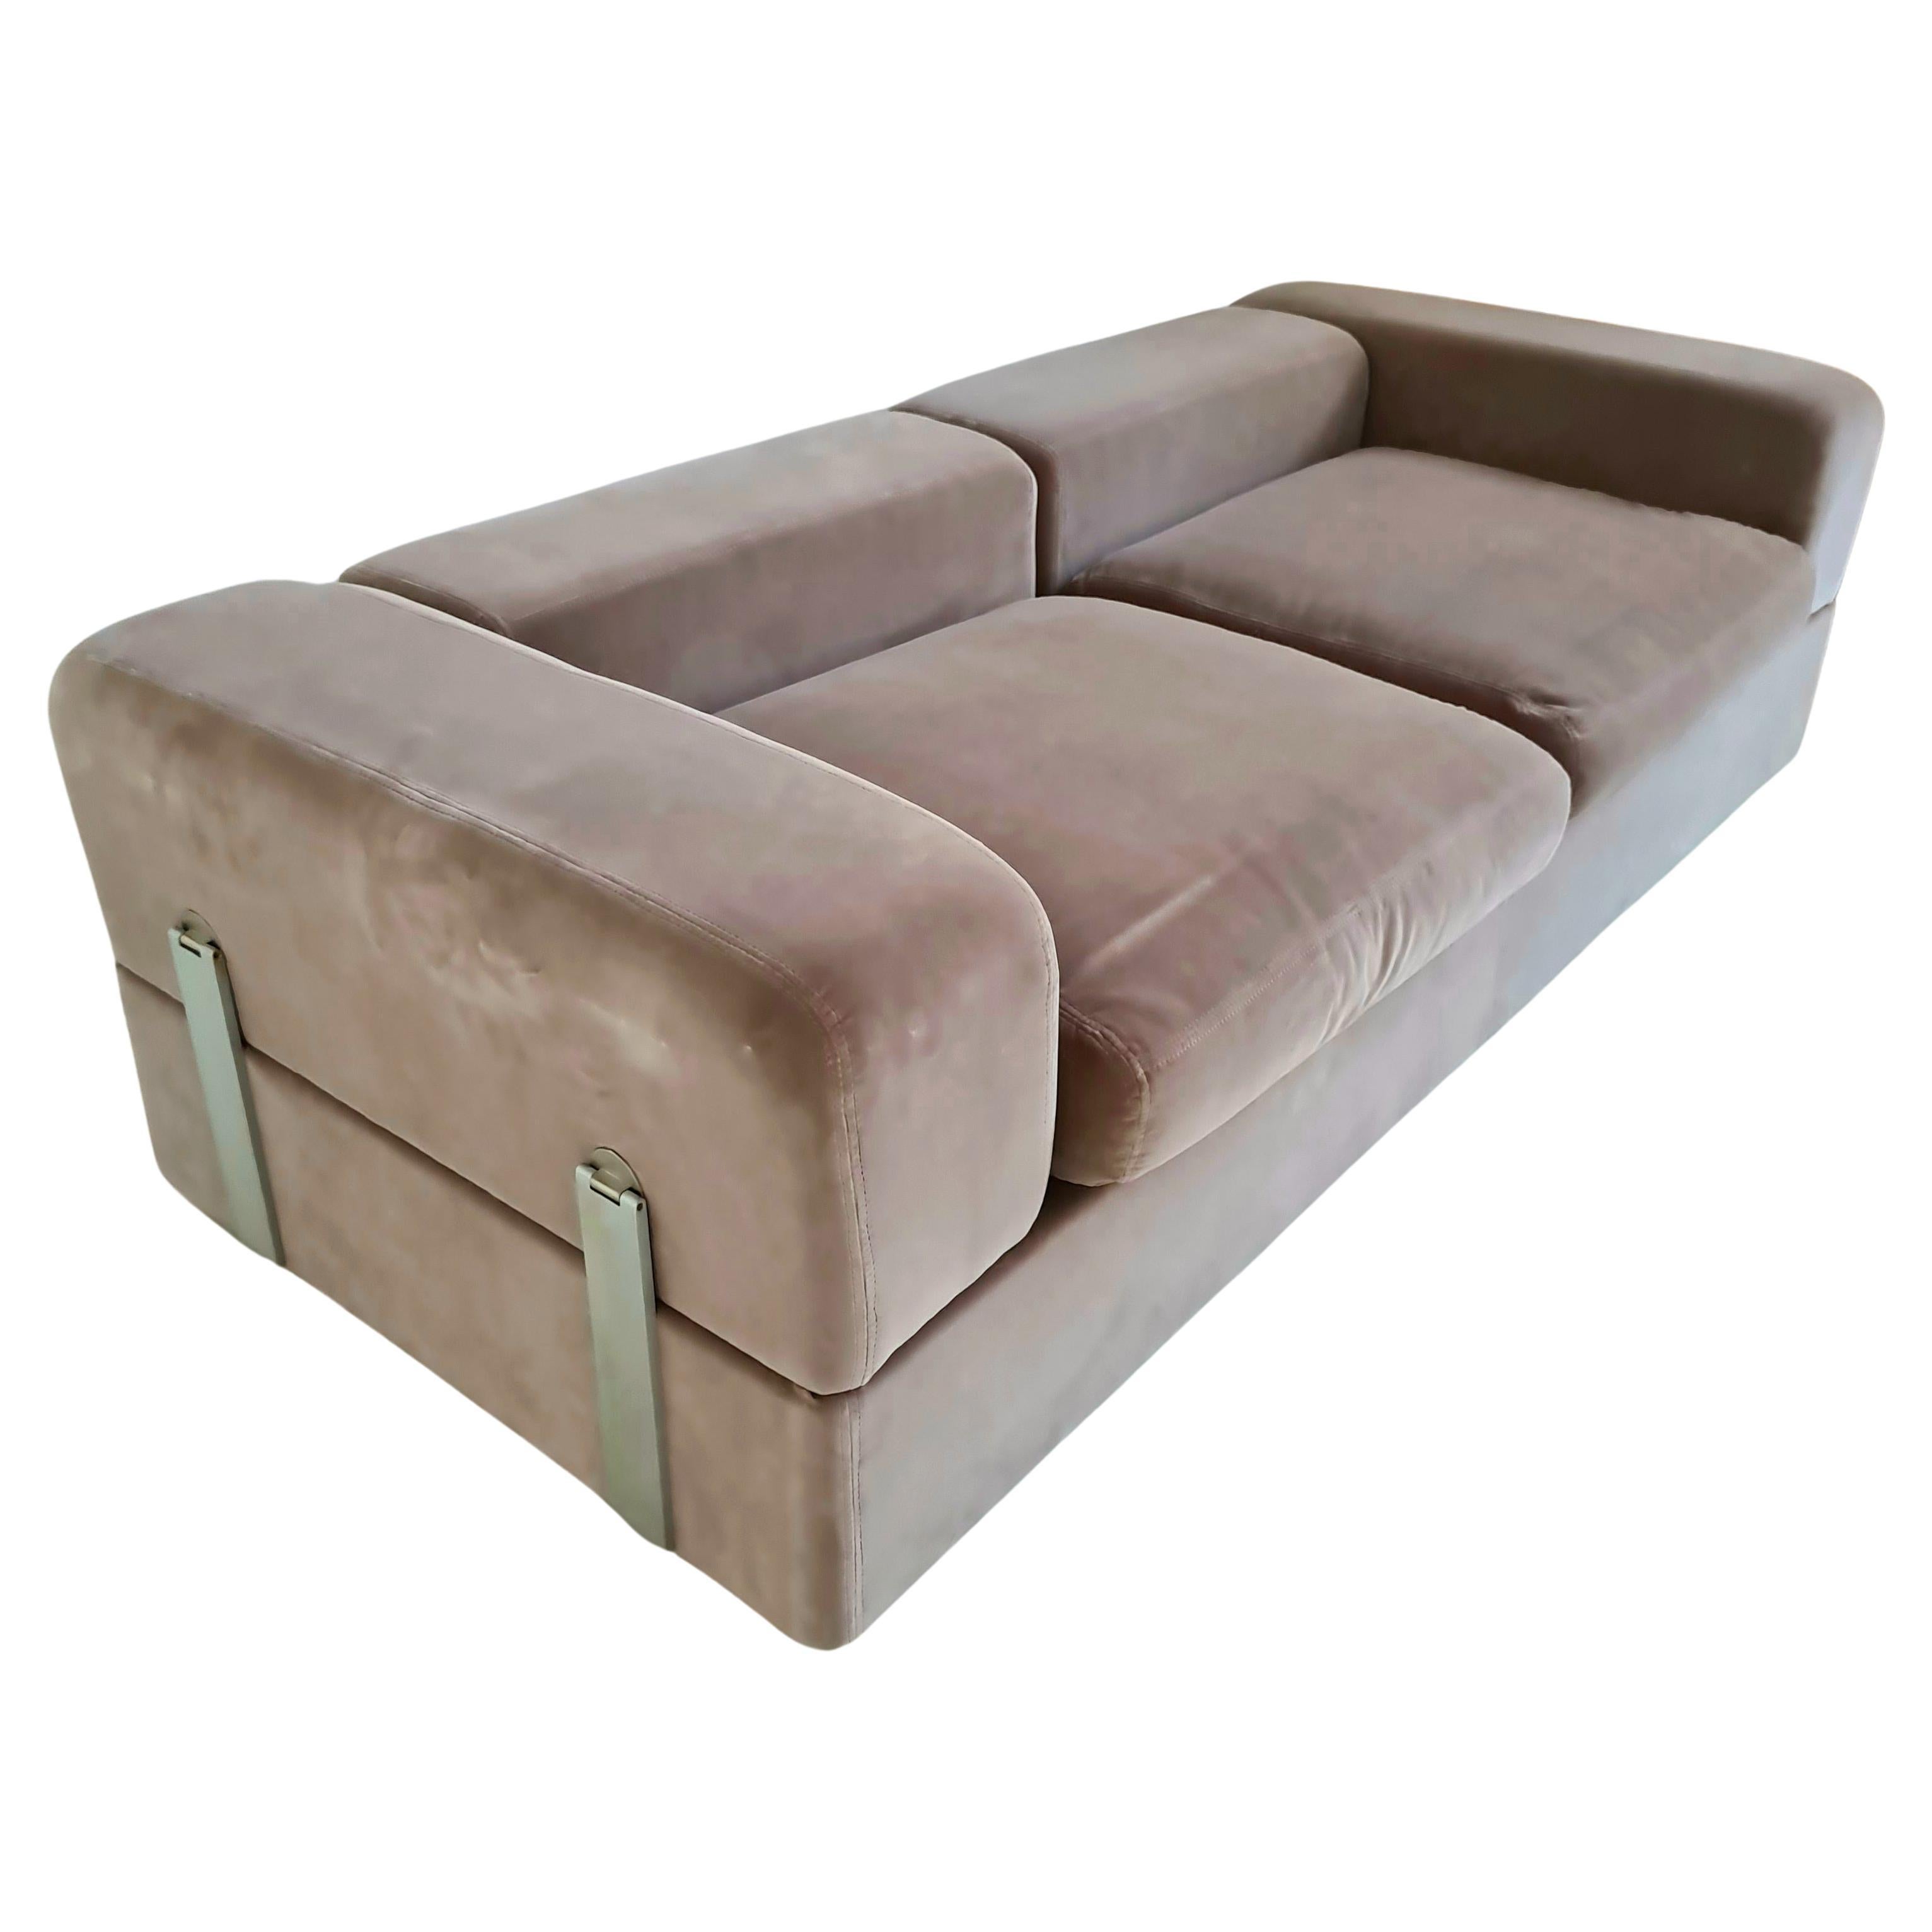 Tito Agnoli's Model 711 for Cinova is one of the rare examples of a designer sofa bed with exceptional aesthetic results.
The contrast between the velvet structure and the visible steel bars on the side and rear parts  give an effect of luxury and